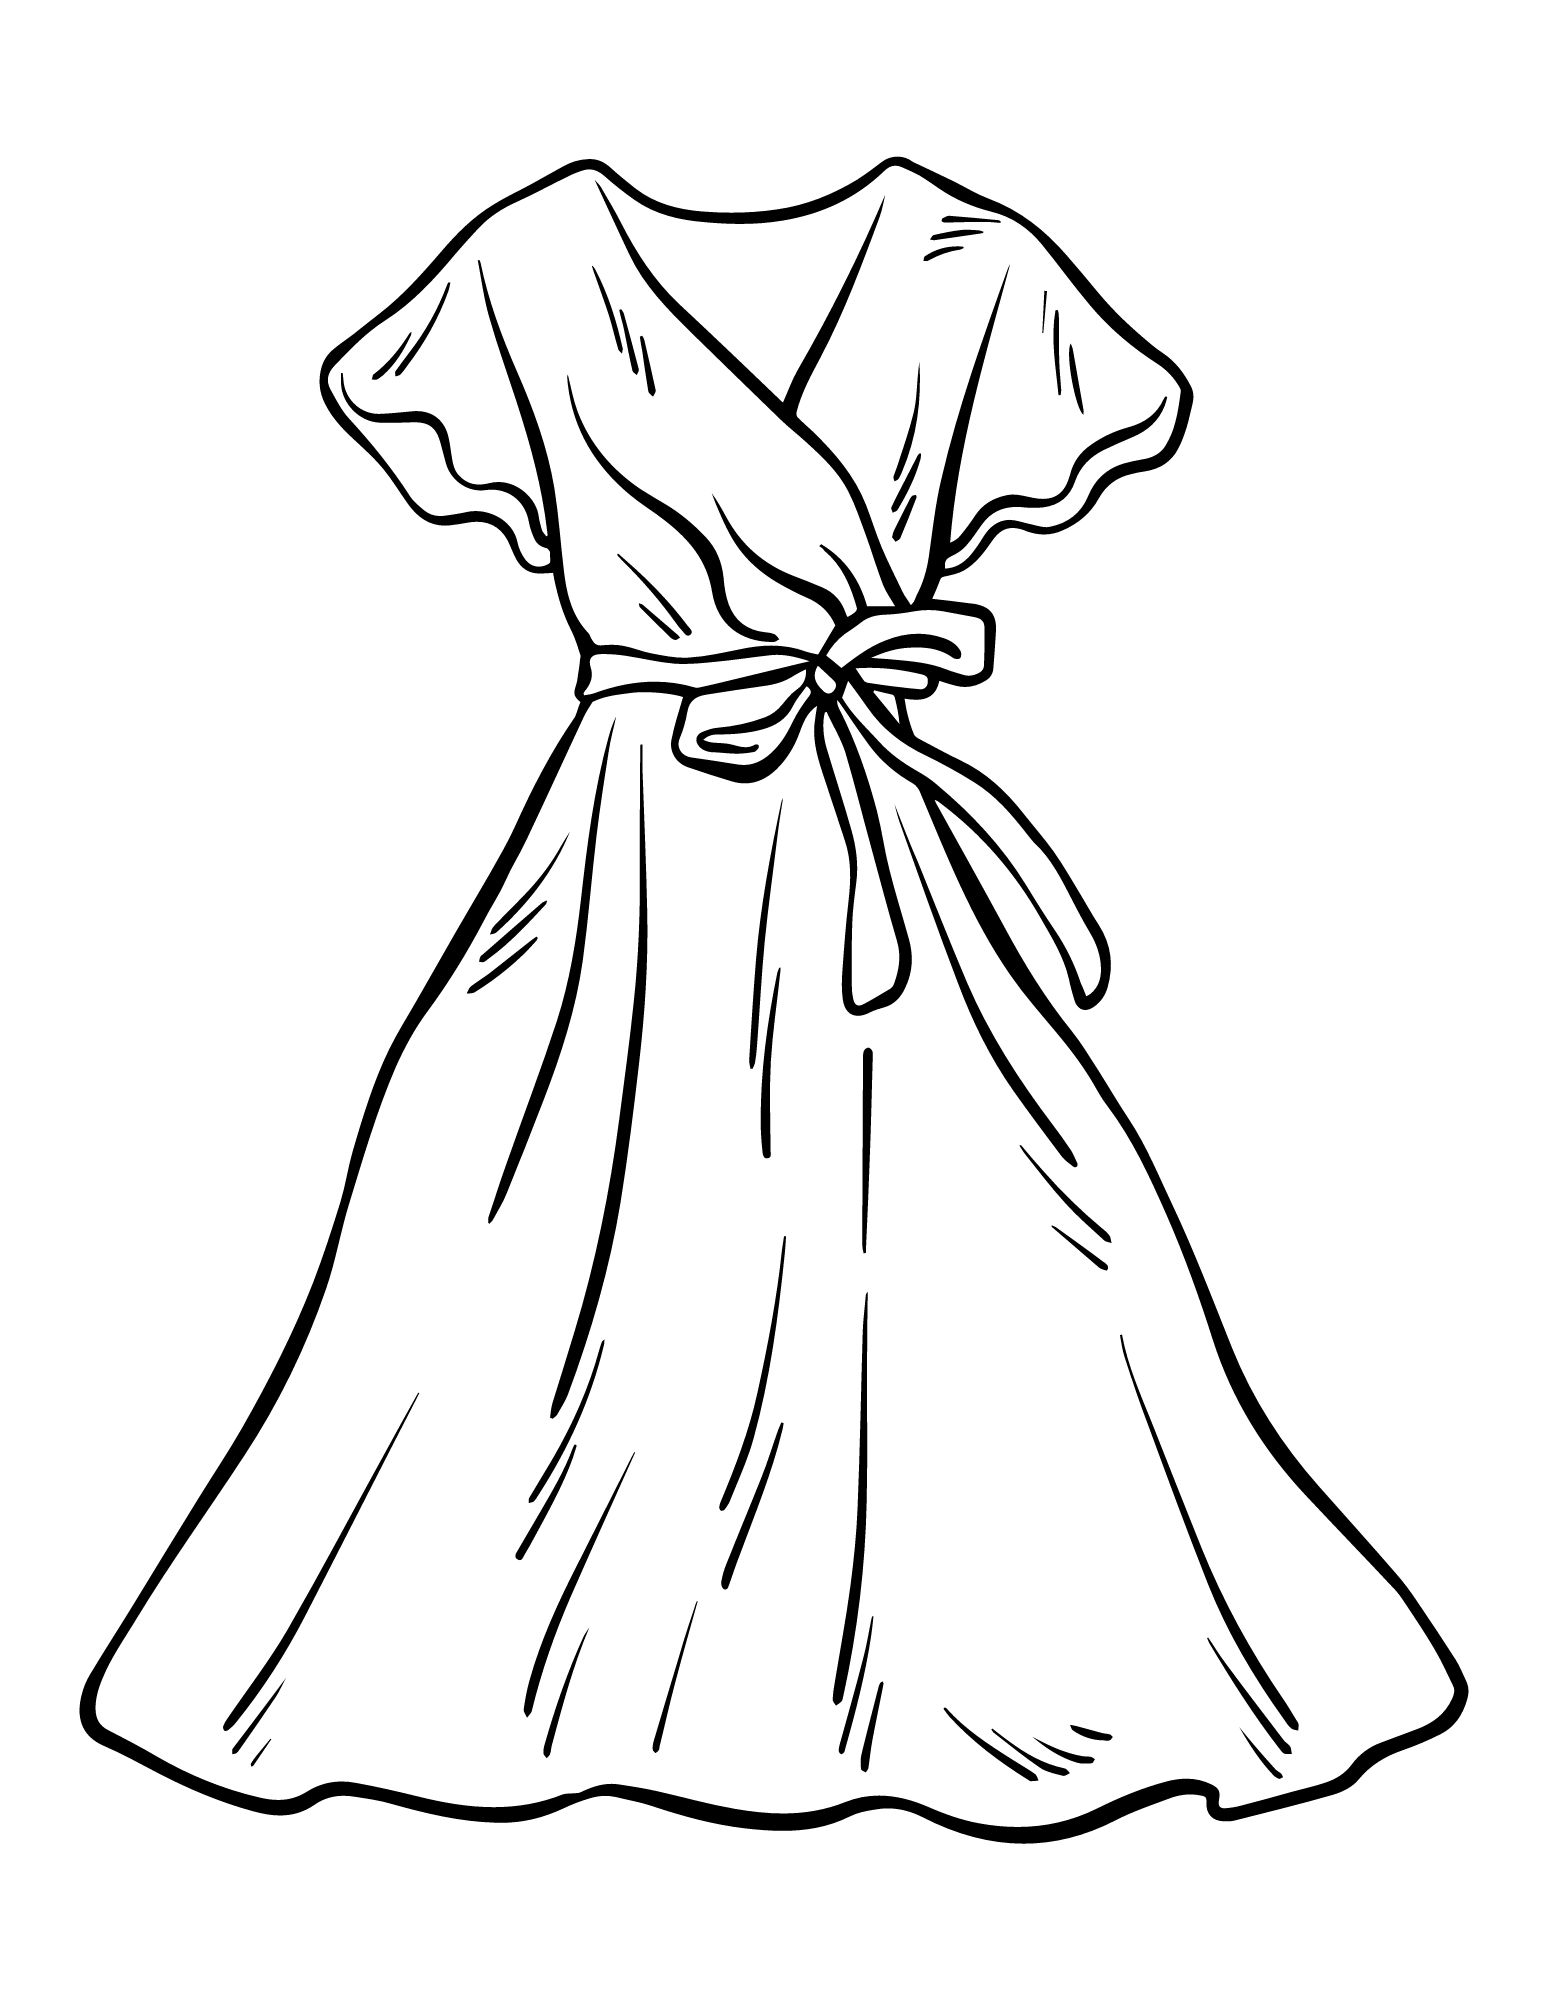 49 Stunning Dress Coloring Pages For Kids And Adults - Our Mindful Life